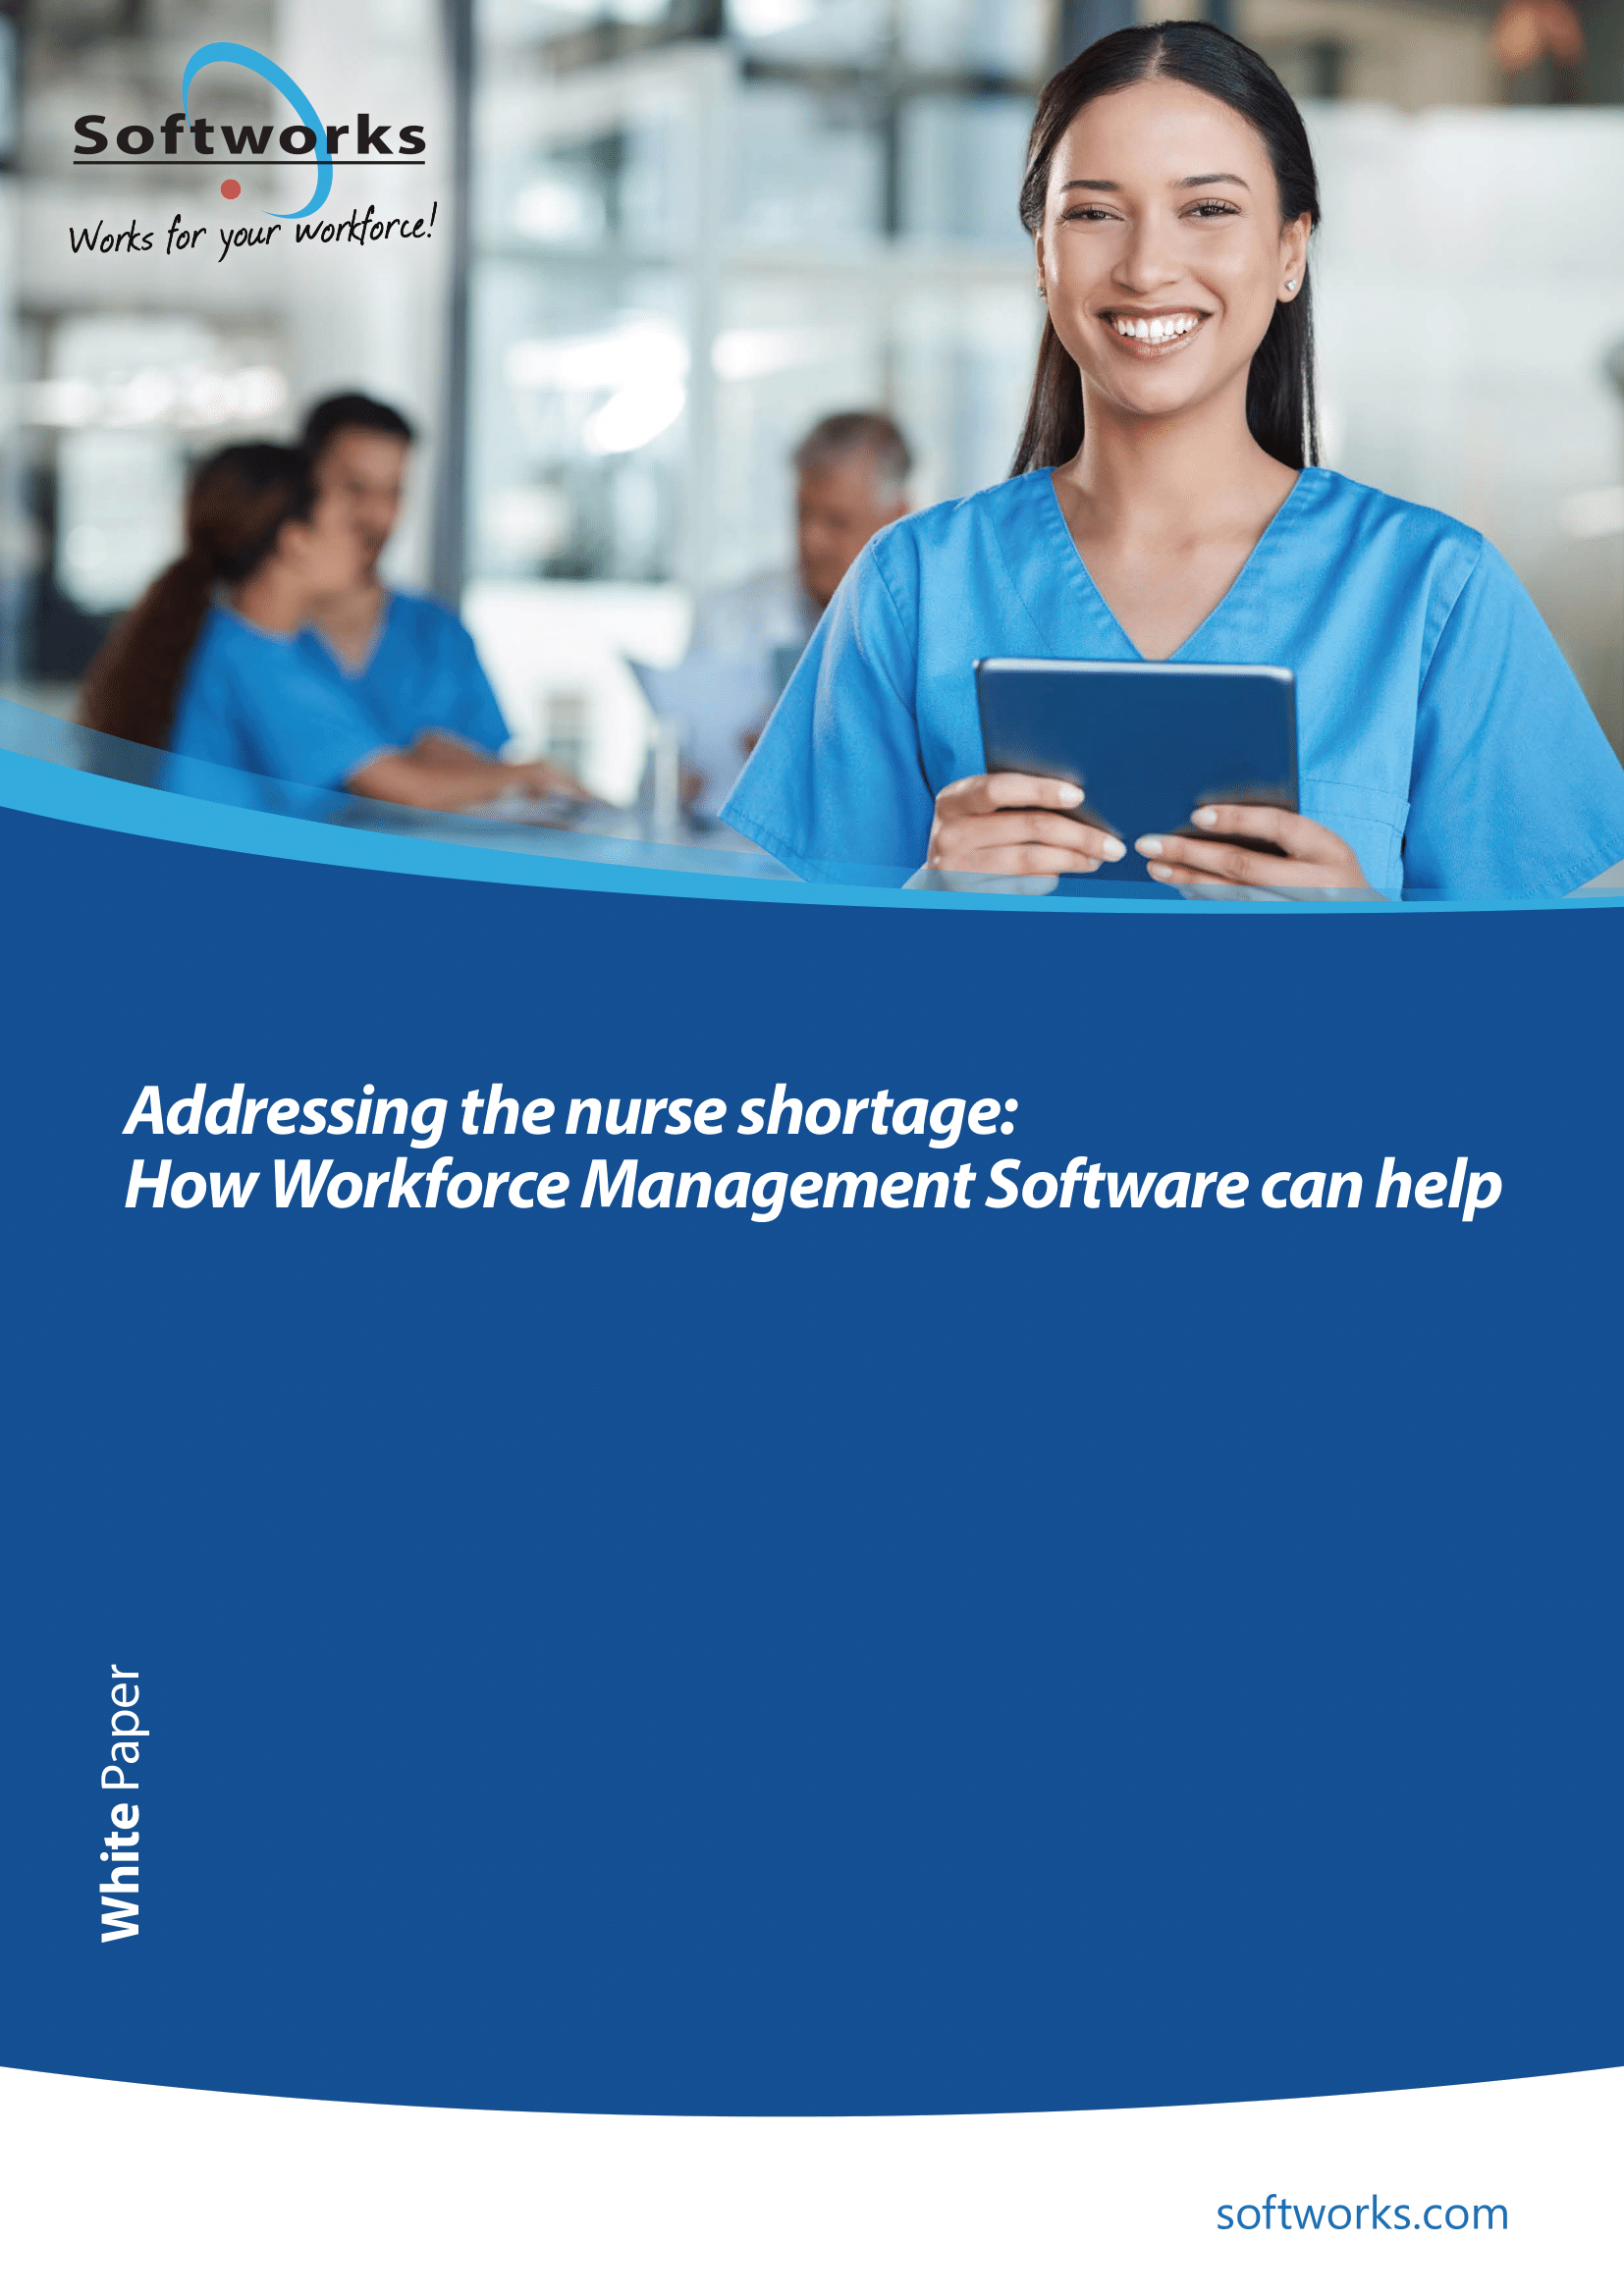 Addressing the nurse shortage: How Workforce Management Software can help